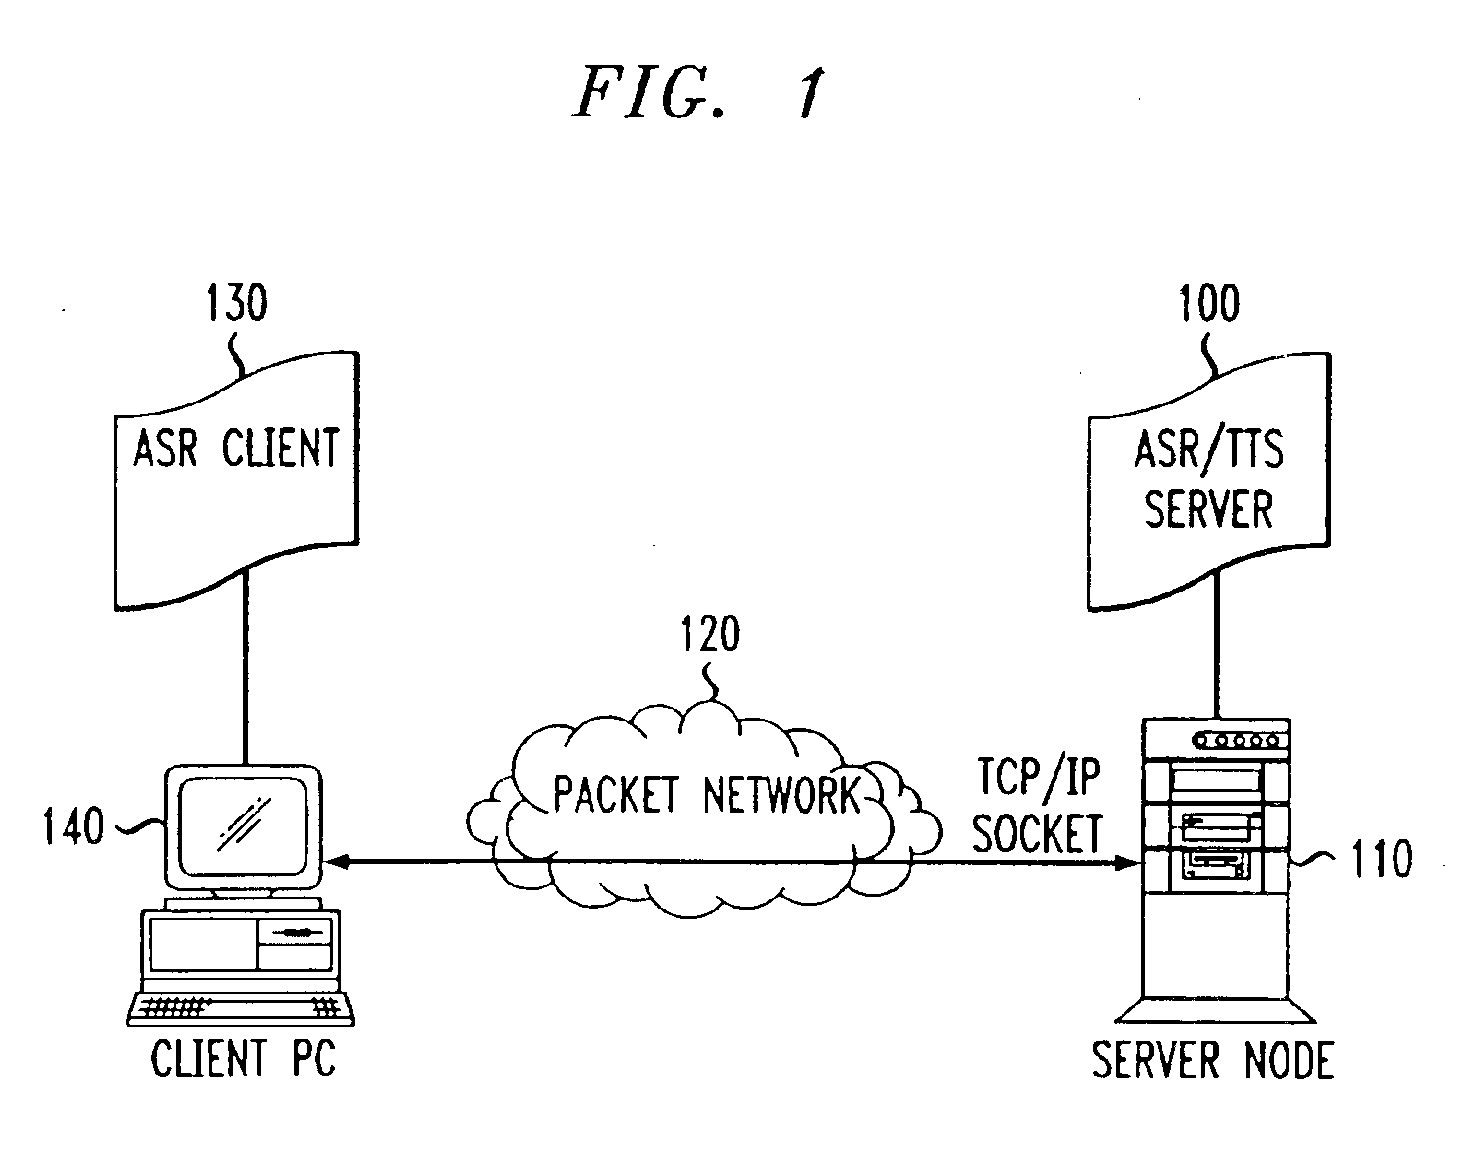 System and method for providing remote automatic speech recognition and text-to-speech services via a packet network